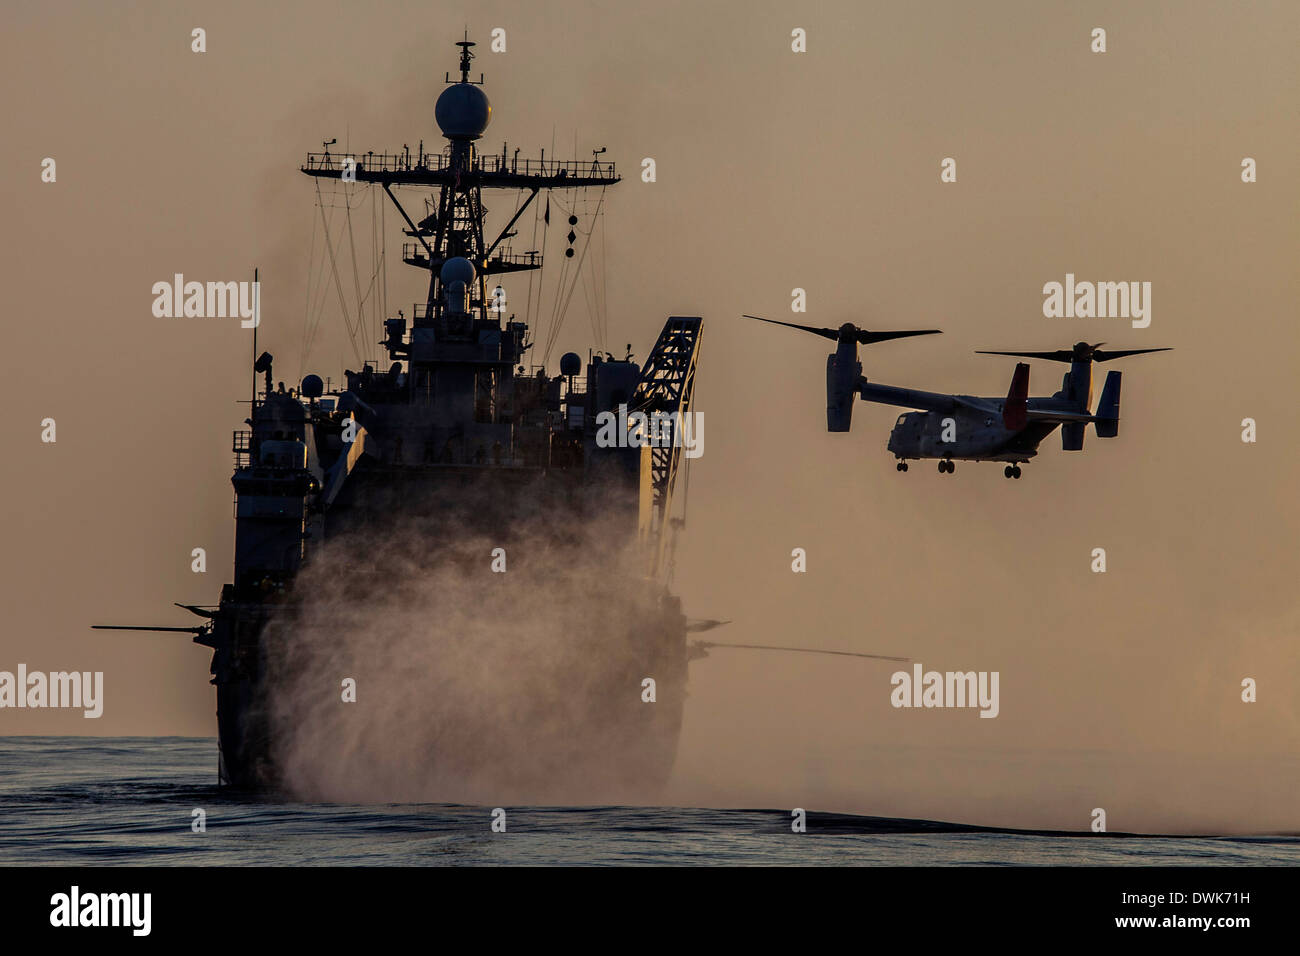 A US Marine Corps MV-22 Osprey comes in to land on the Whidbey Island-class dock landing ship USS Ashland February 28, 2014 in the Pacific Ocean. Stock Photo